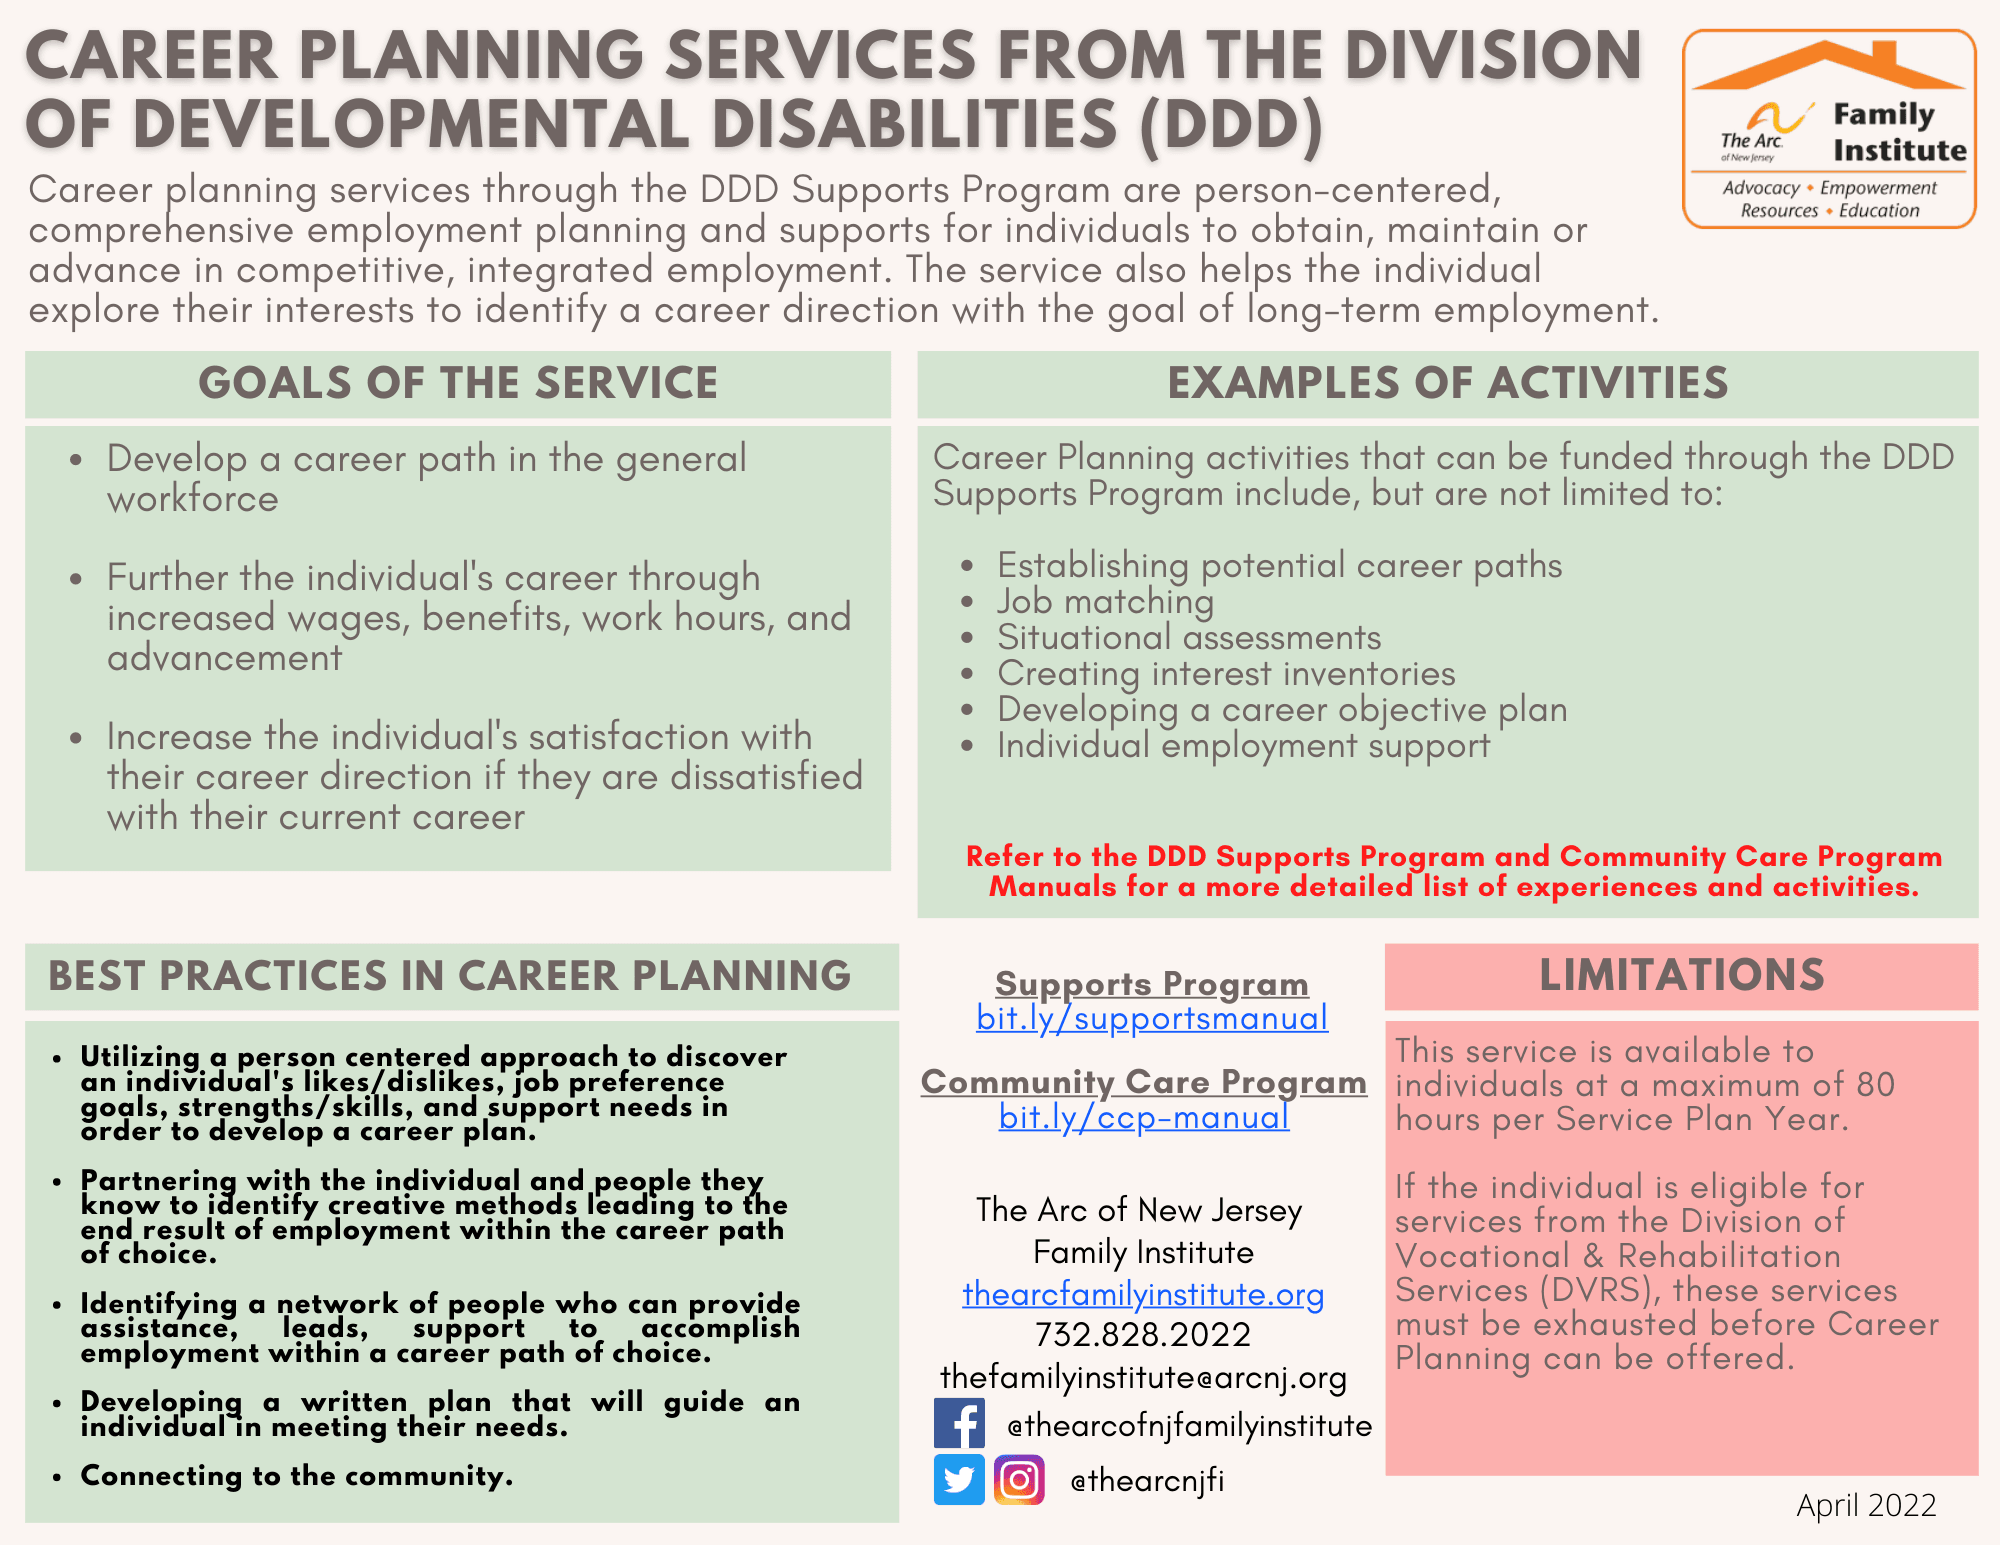 Career Planning Services Through the Division of Developmental Disabilities (DDD)